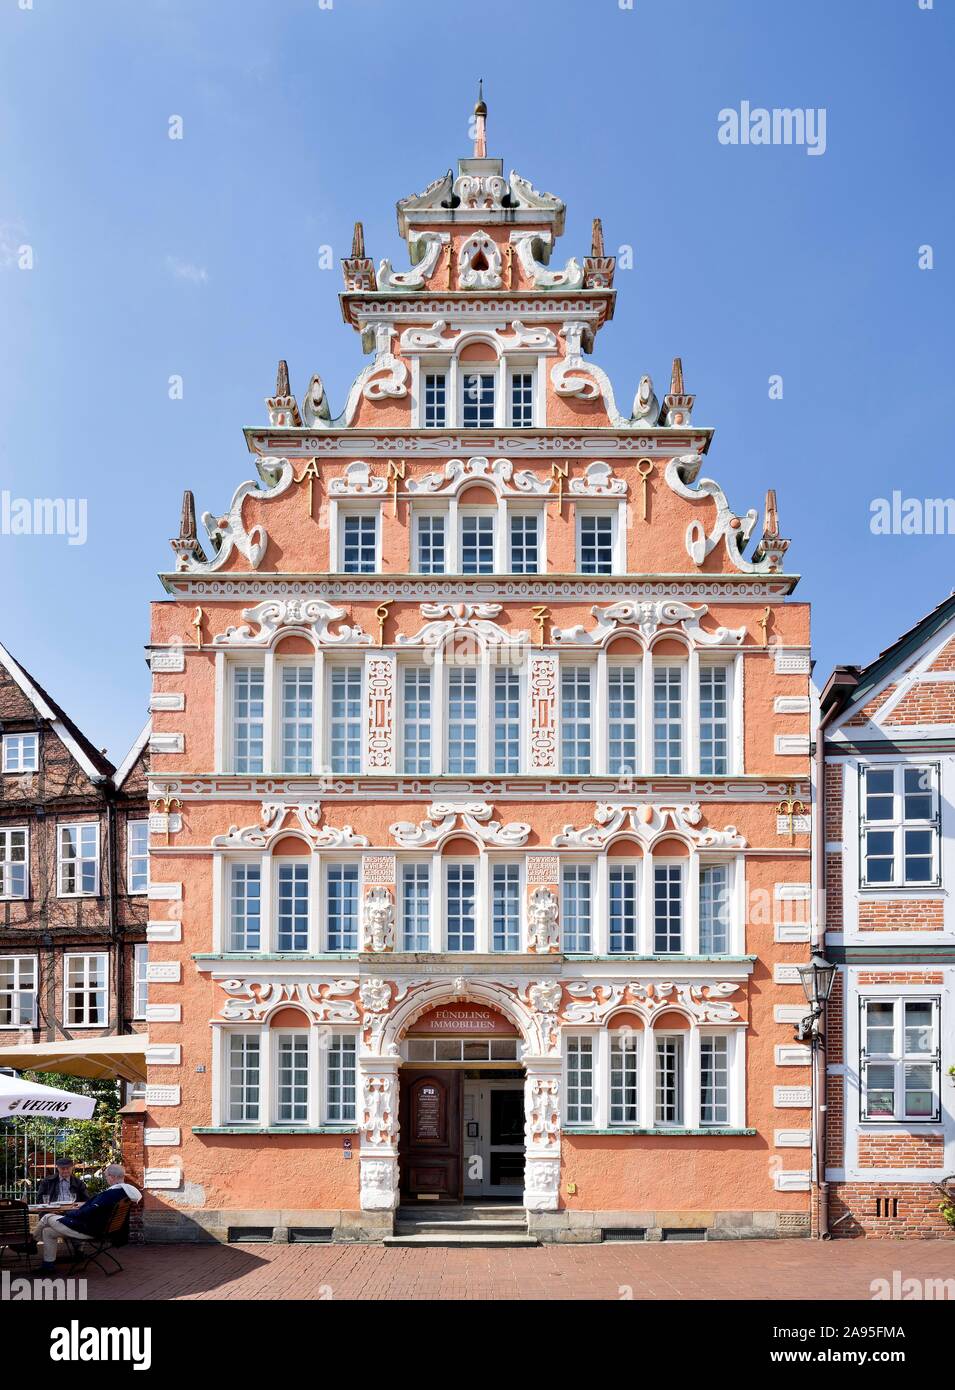 Burgermeister-Hintze-Haus, historic merchant and warehouse building, Weser Renaissance, Hanseatic harbour, old town, Stade, Lower Saxony, Germany Stock Photo